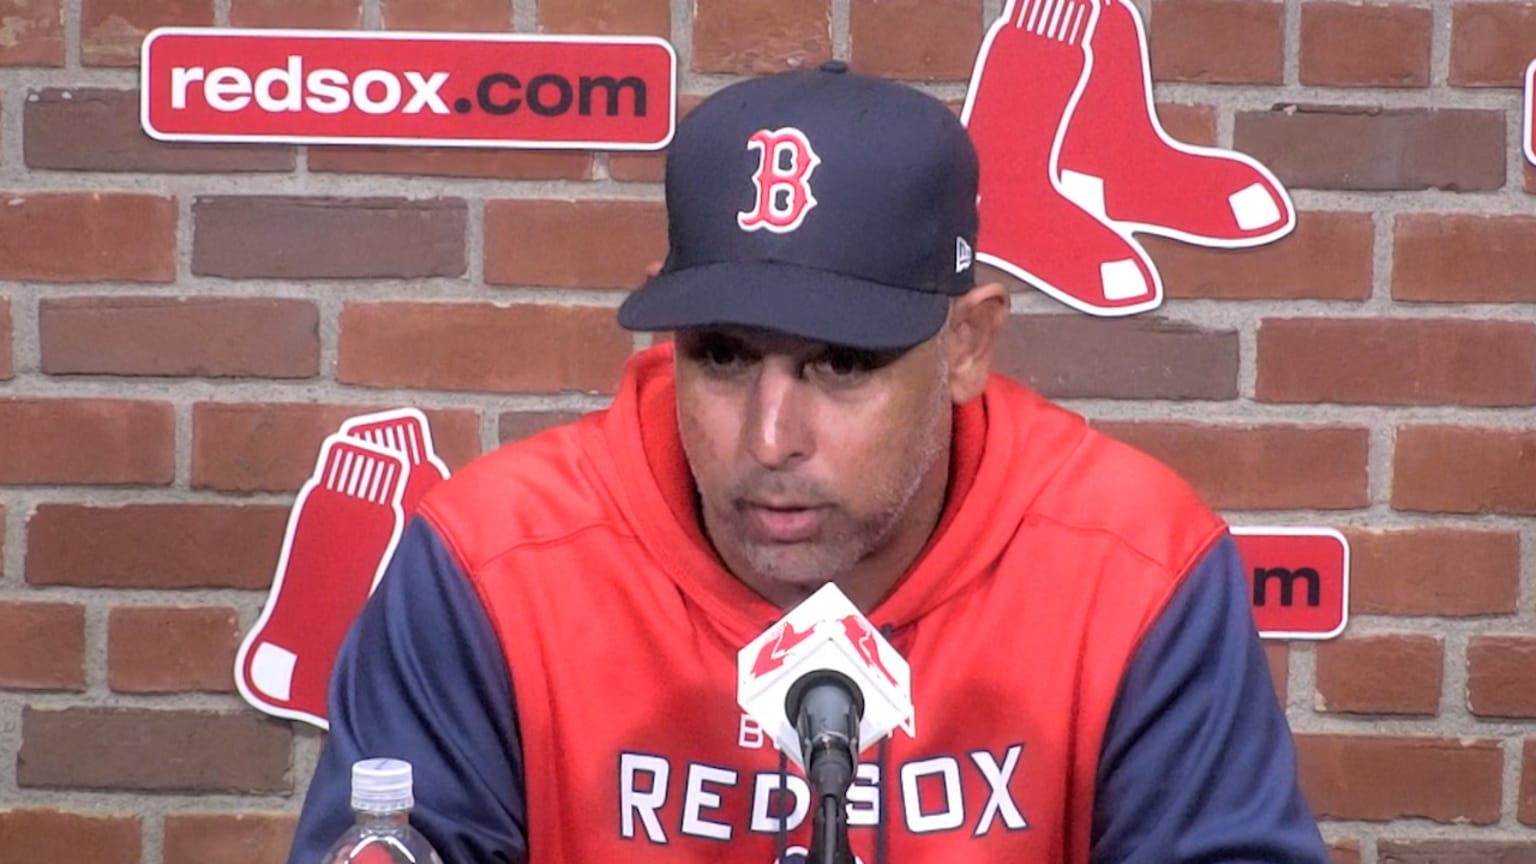 Alex Cora: A special blend of confidence helped him turn the Red